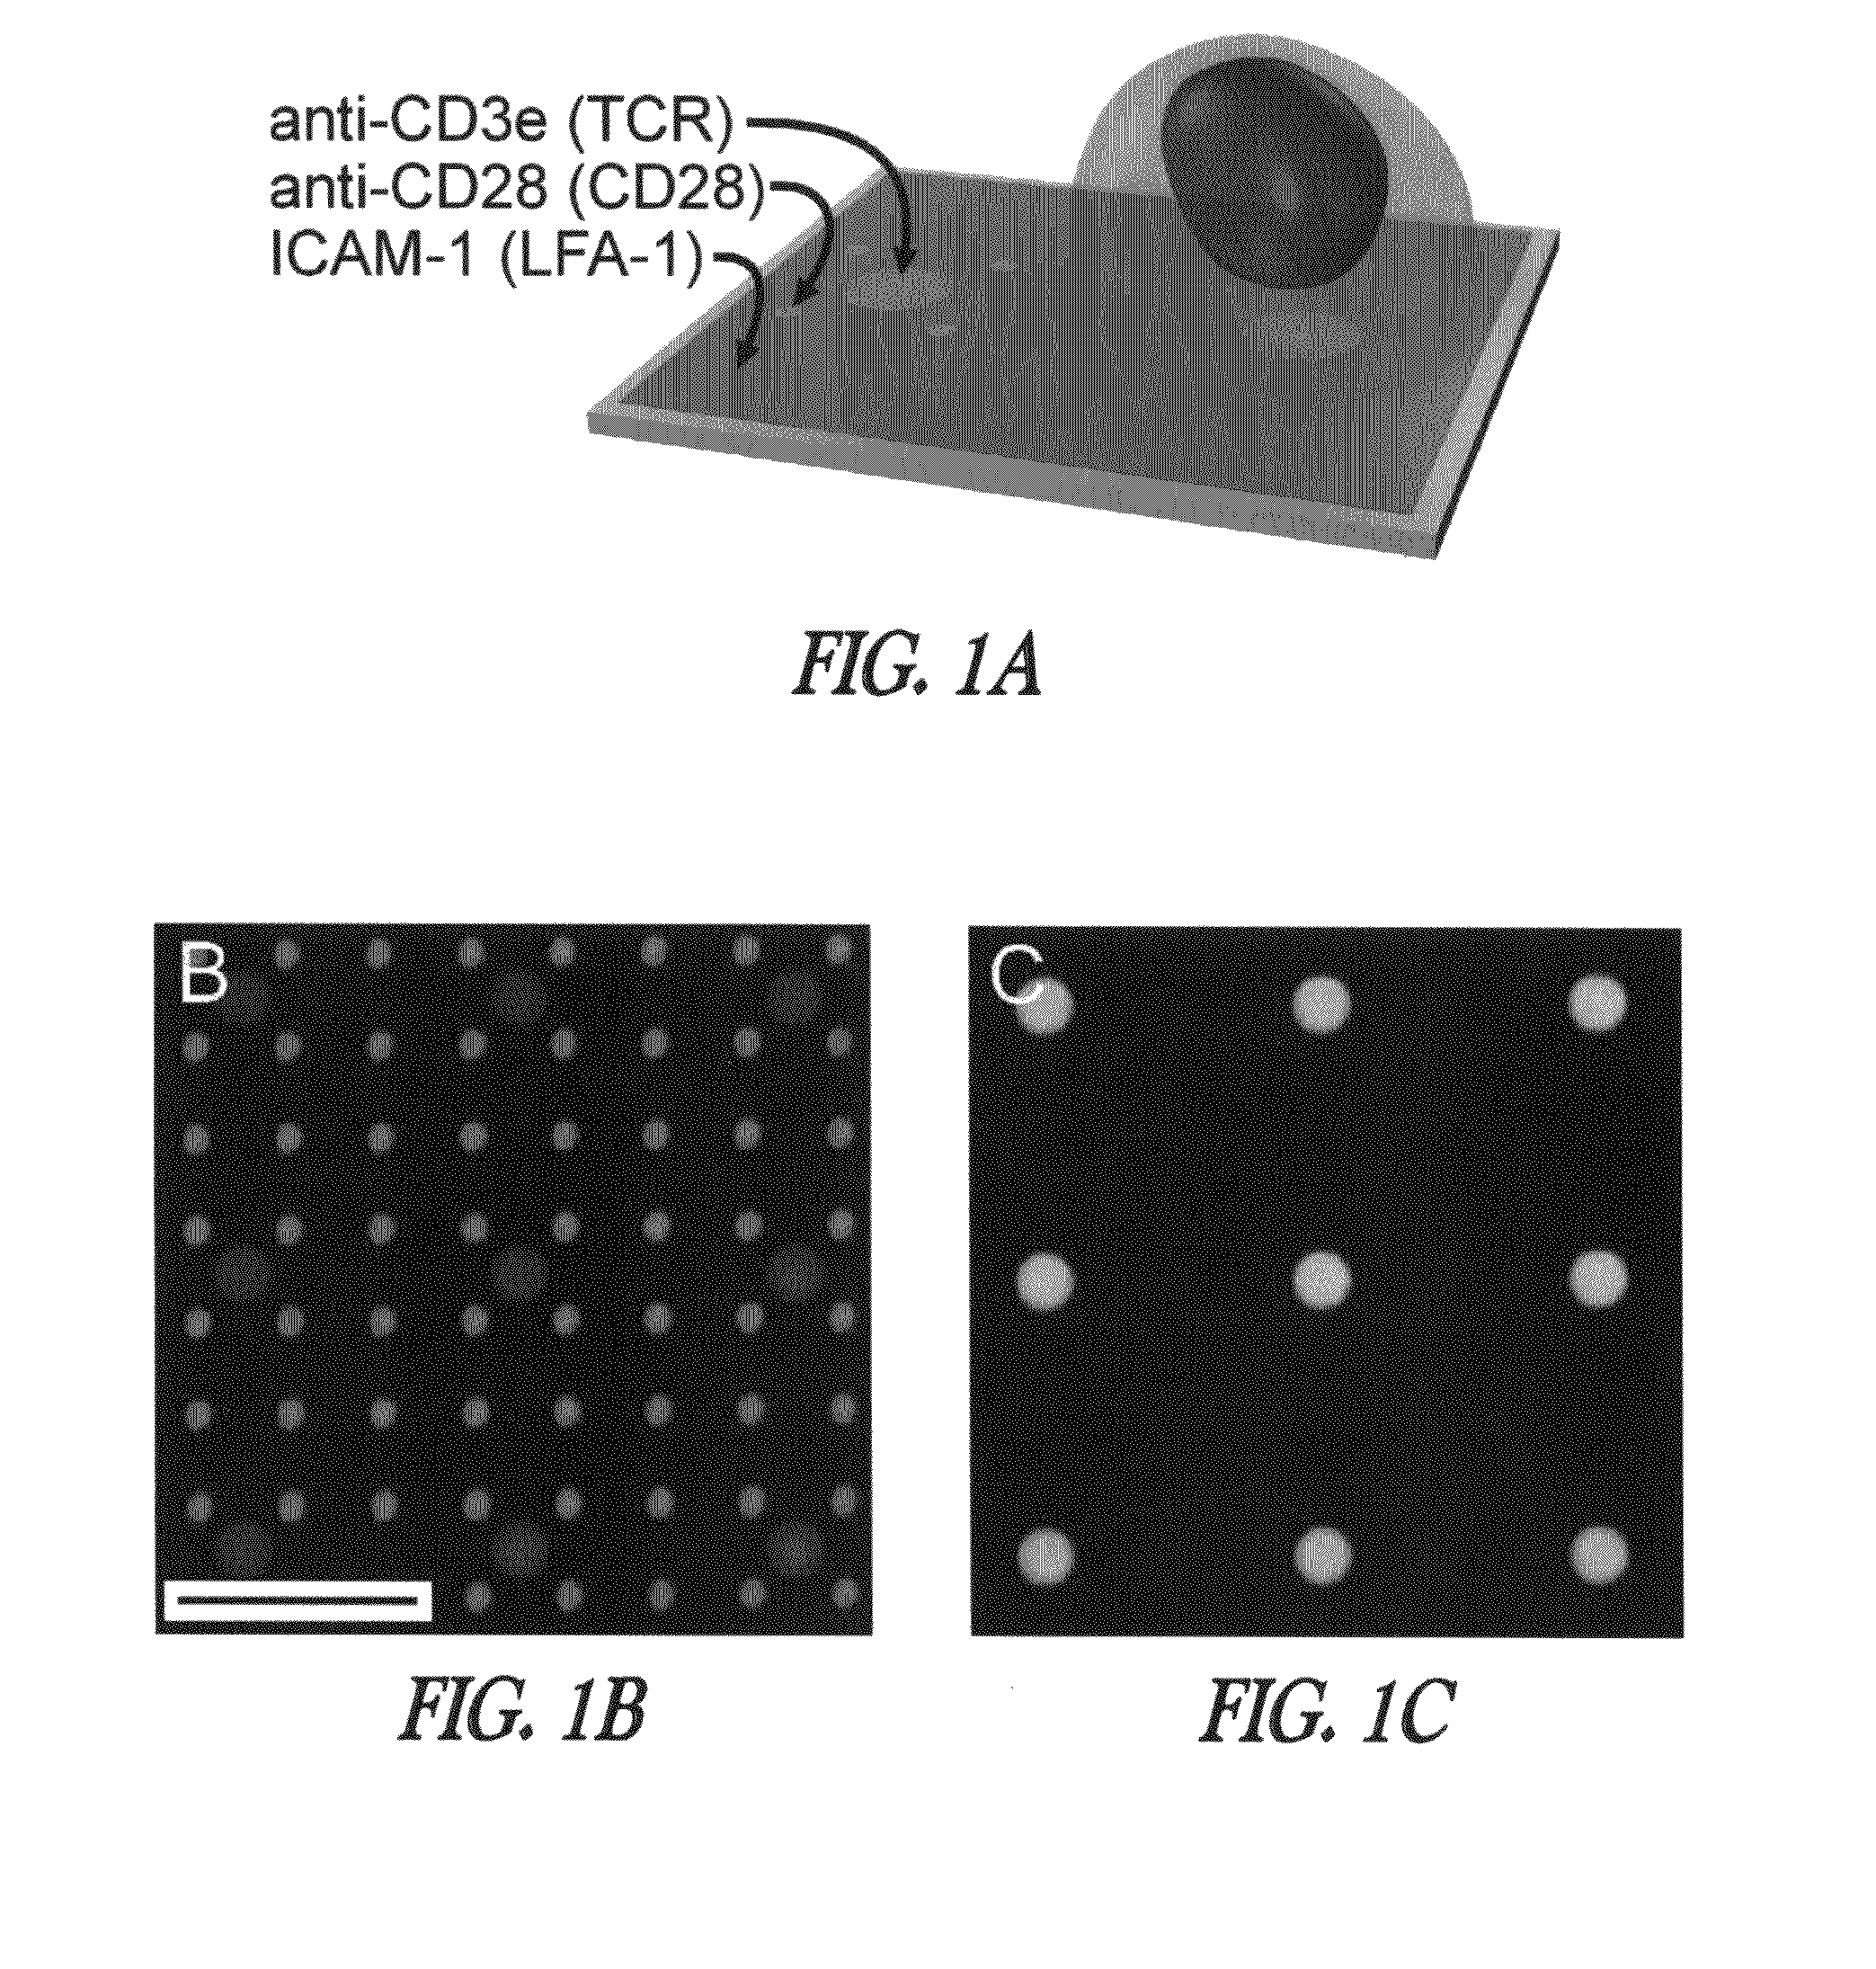 Micropatterned T cell stimulation